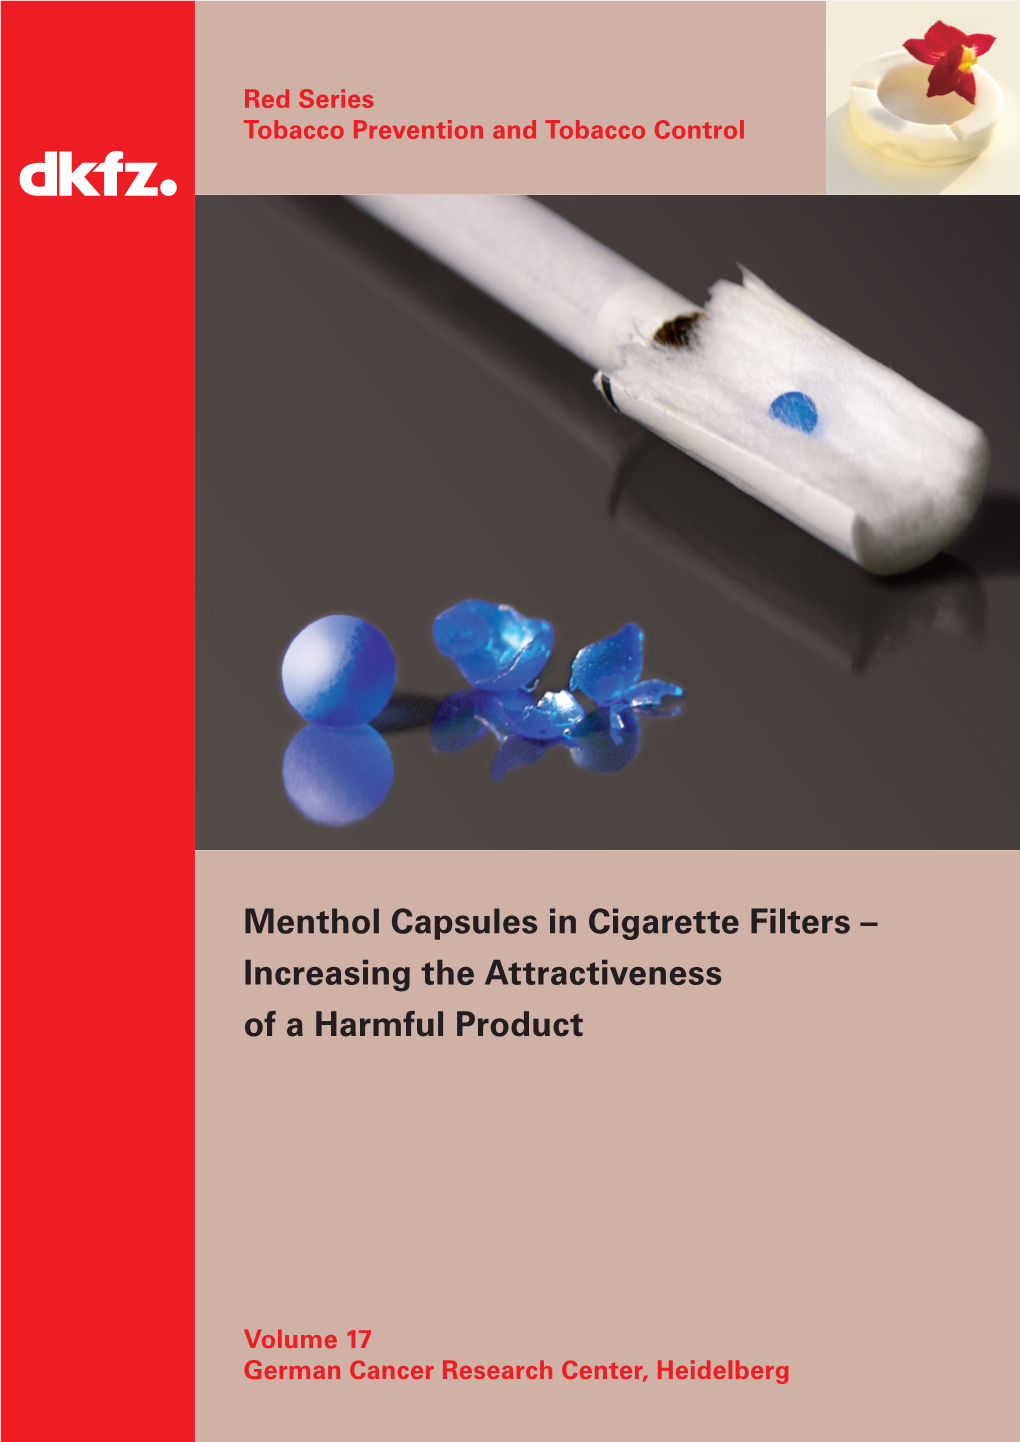 Menthol Capsules in Cigarette Filters – Increasing the Attractiveness of a Harmful Product